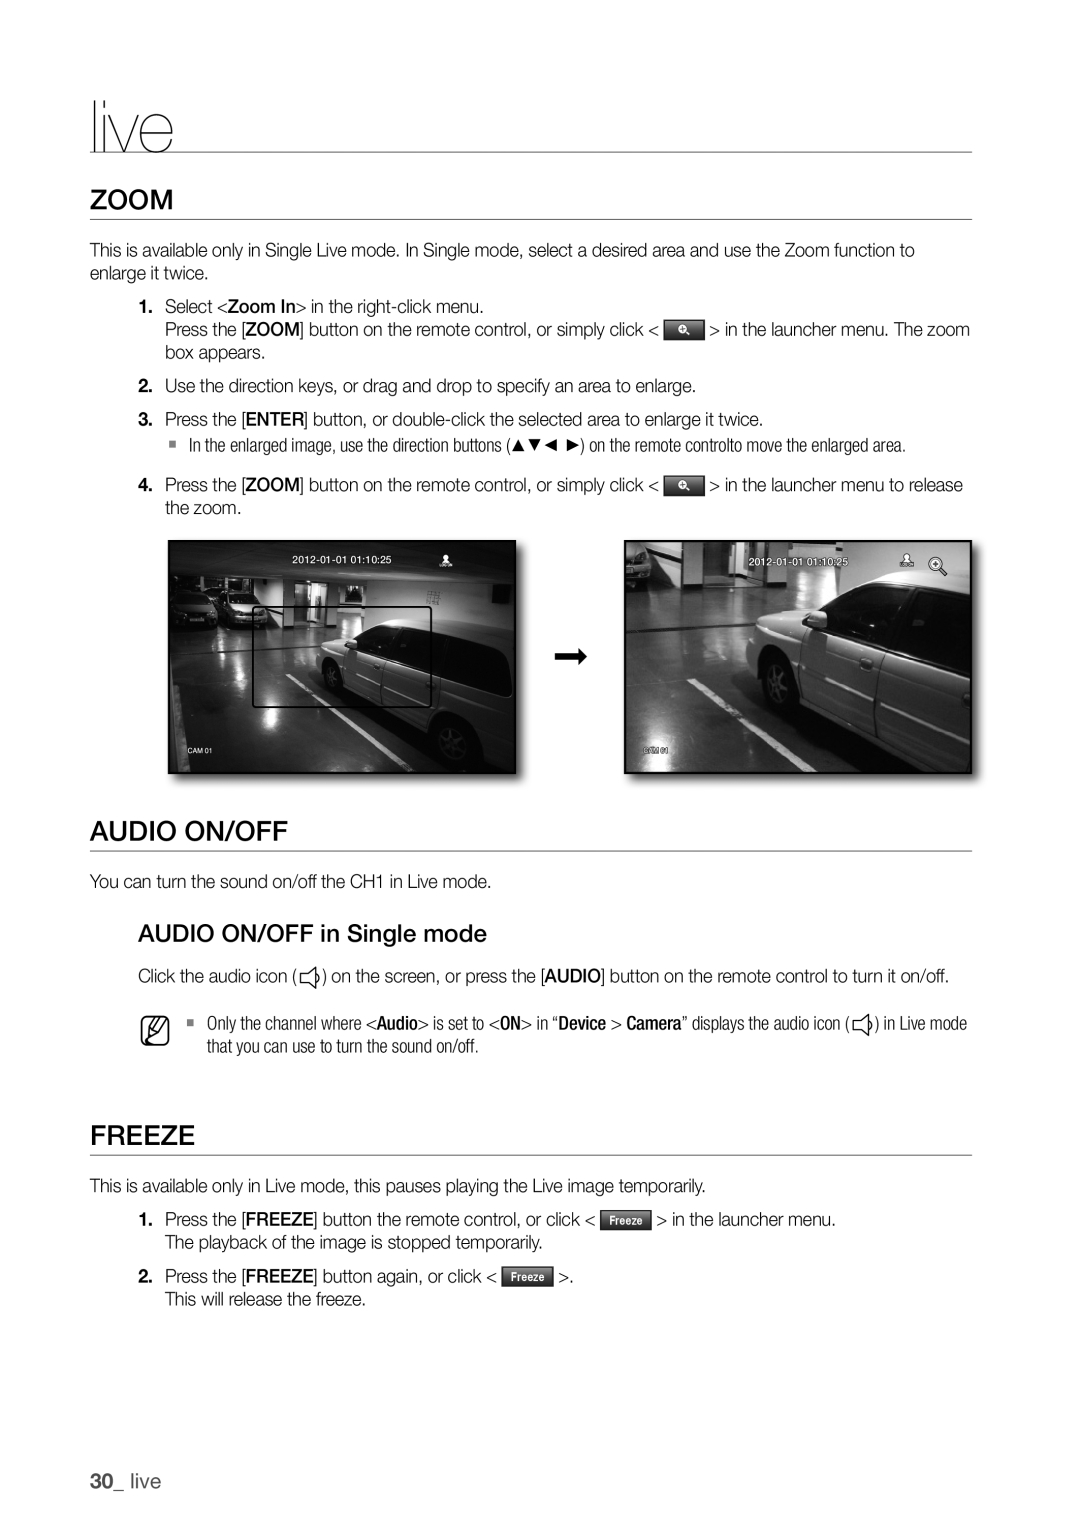 Samsung SDR3100 user manual Zoom, freeZe, Audio on/off in Single mode, 30_ live 